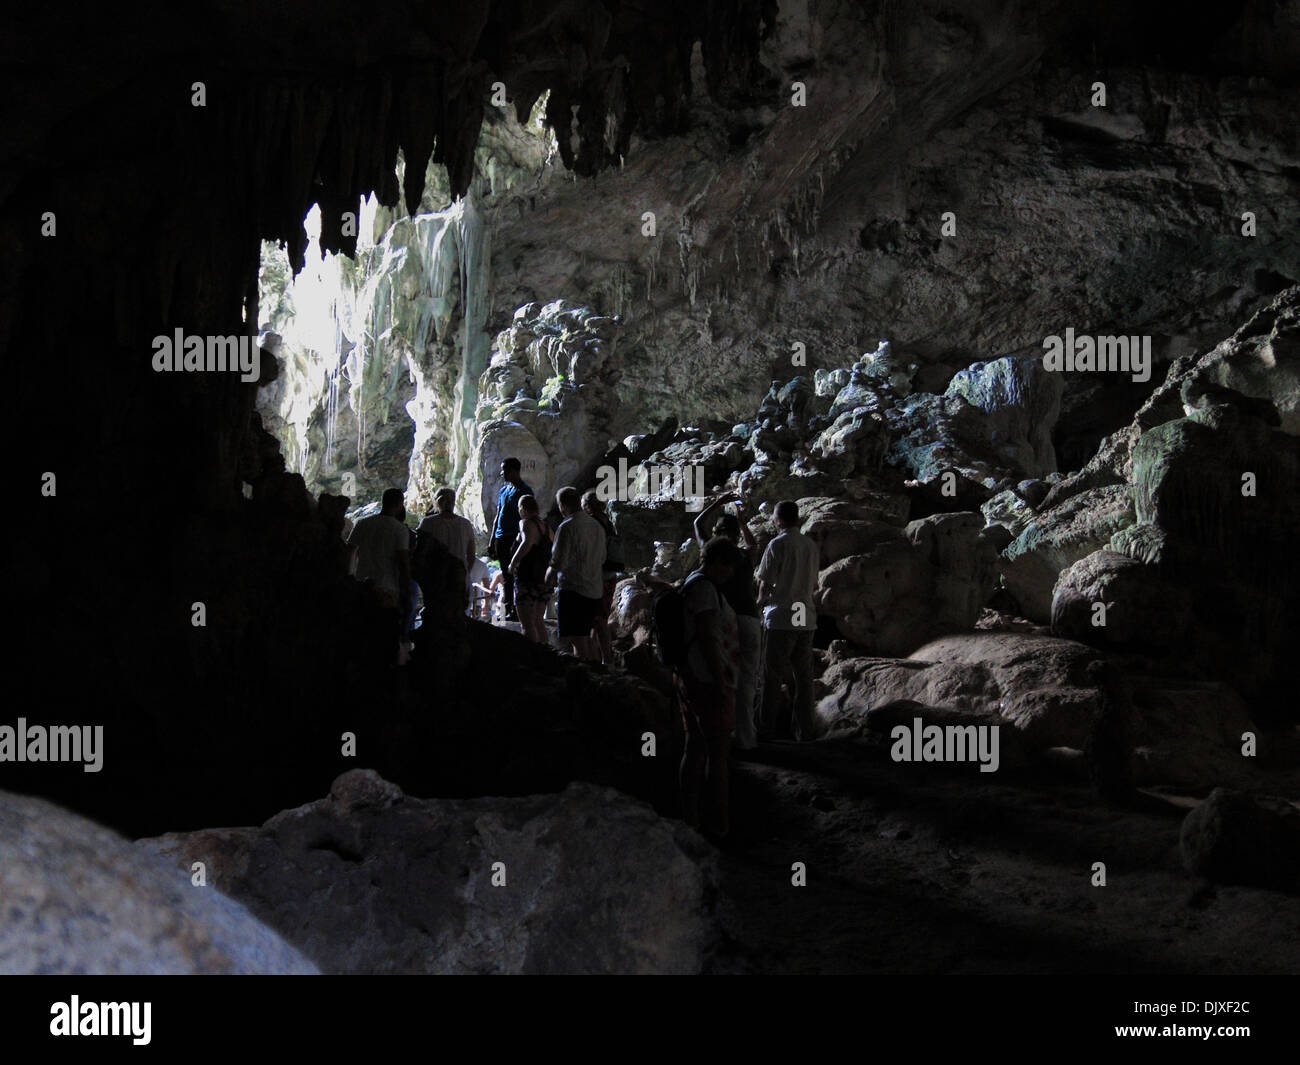 Tourist Group inside the Cave in Los Haitises National Park, Dominican Republic, September 4, 2013 Stock Photo